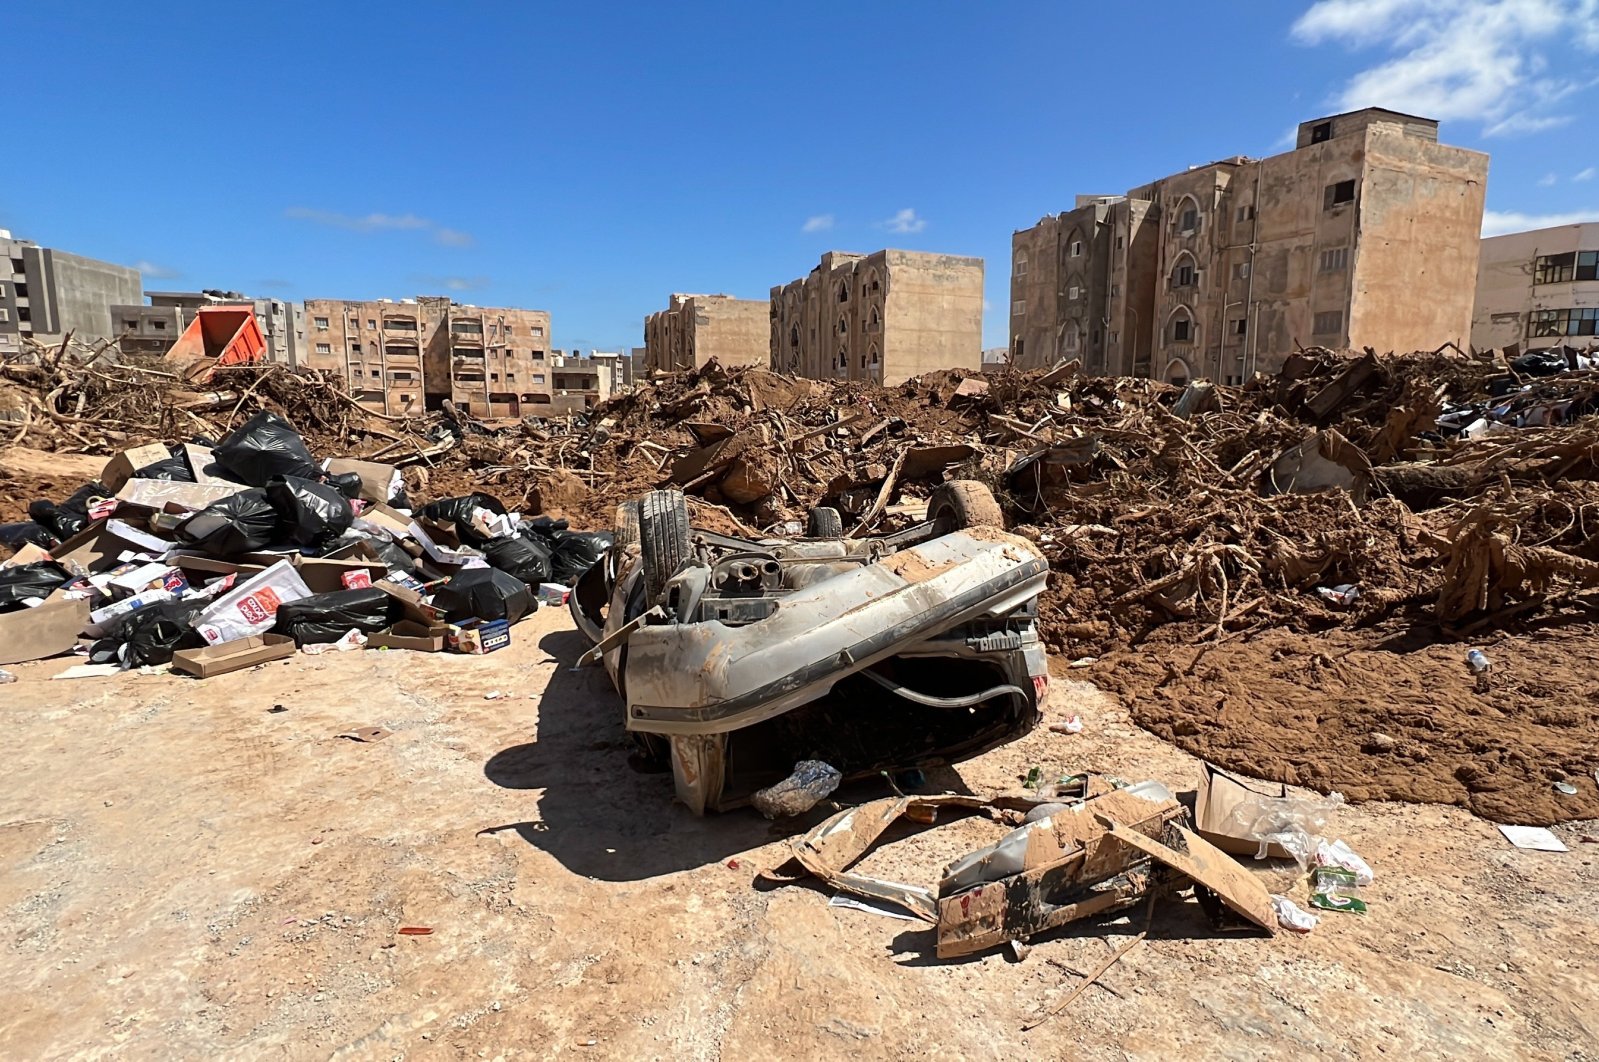 Damaged vehicles in the wake of Storm Daniel and the collapse of two dams that caused devastating floods and swept away entire neighborhoods, Derna, Libya, Sept. 14, 2023. (EPA Photo)